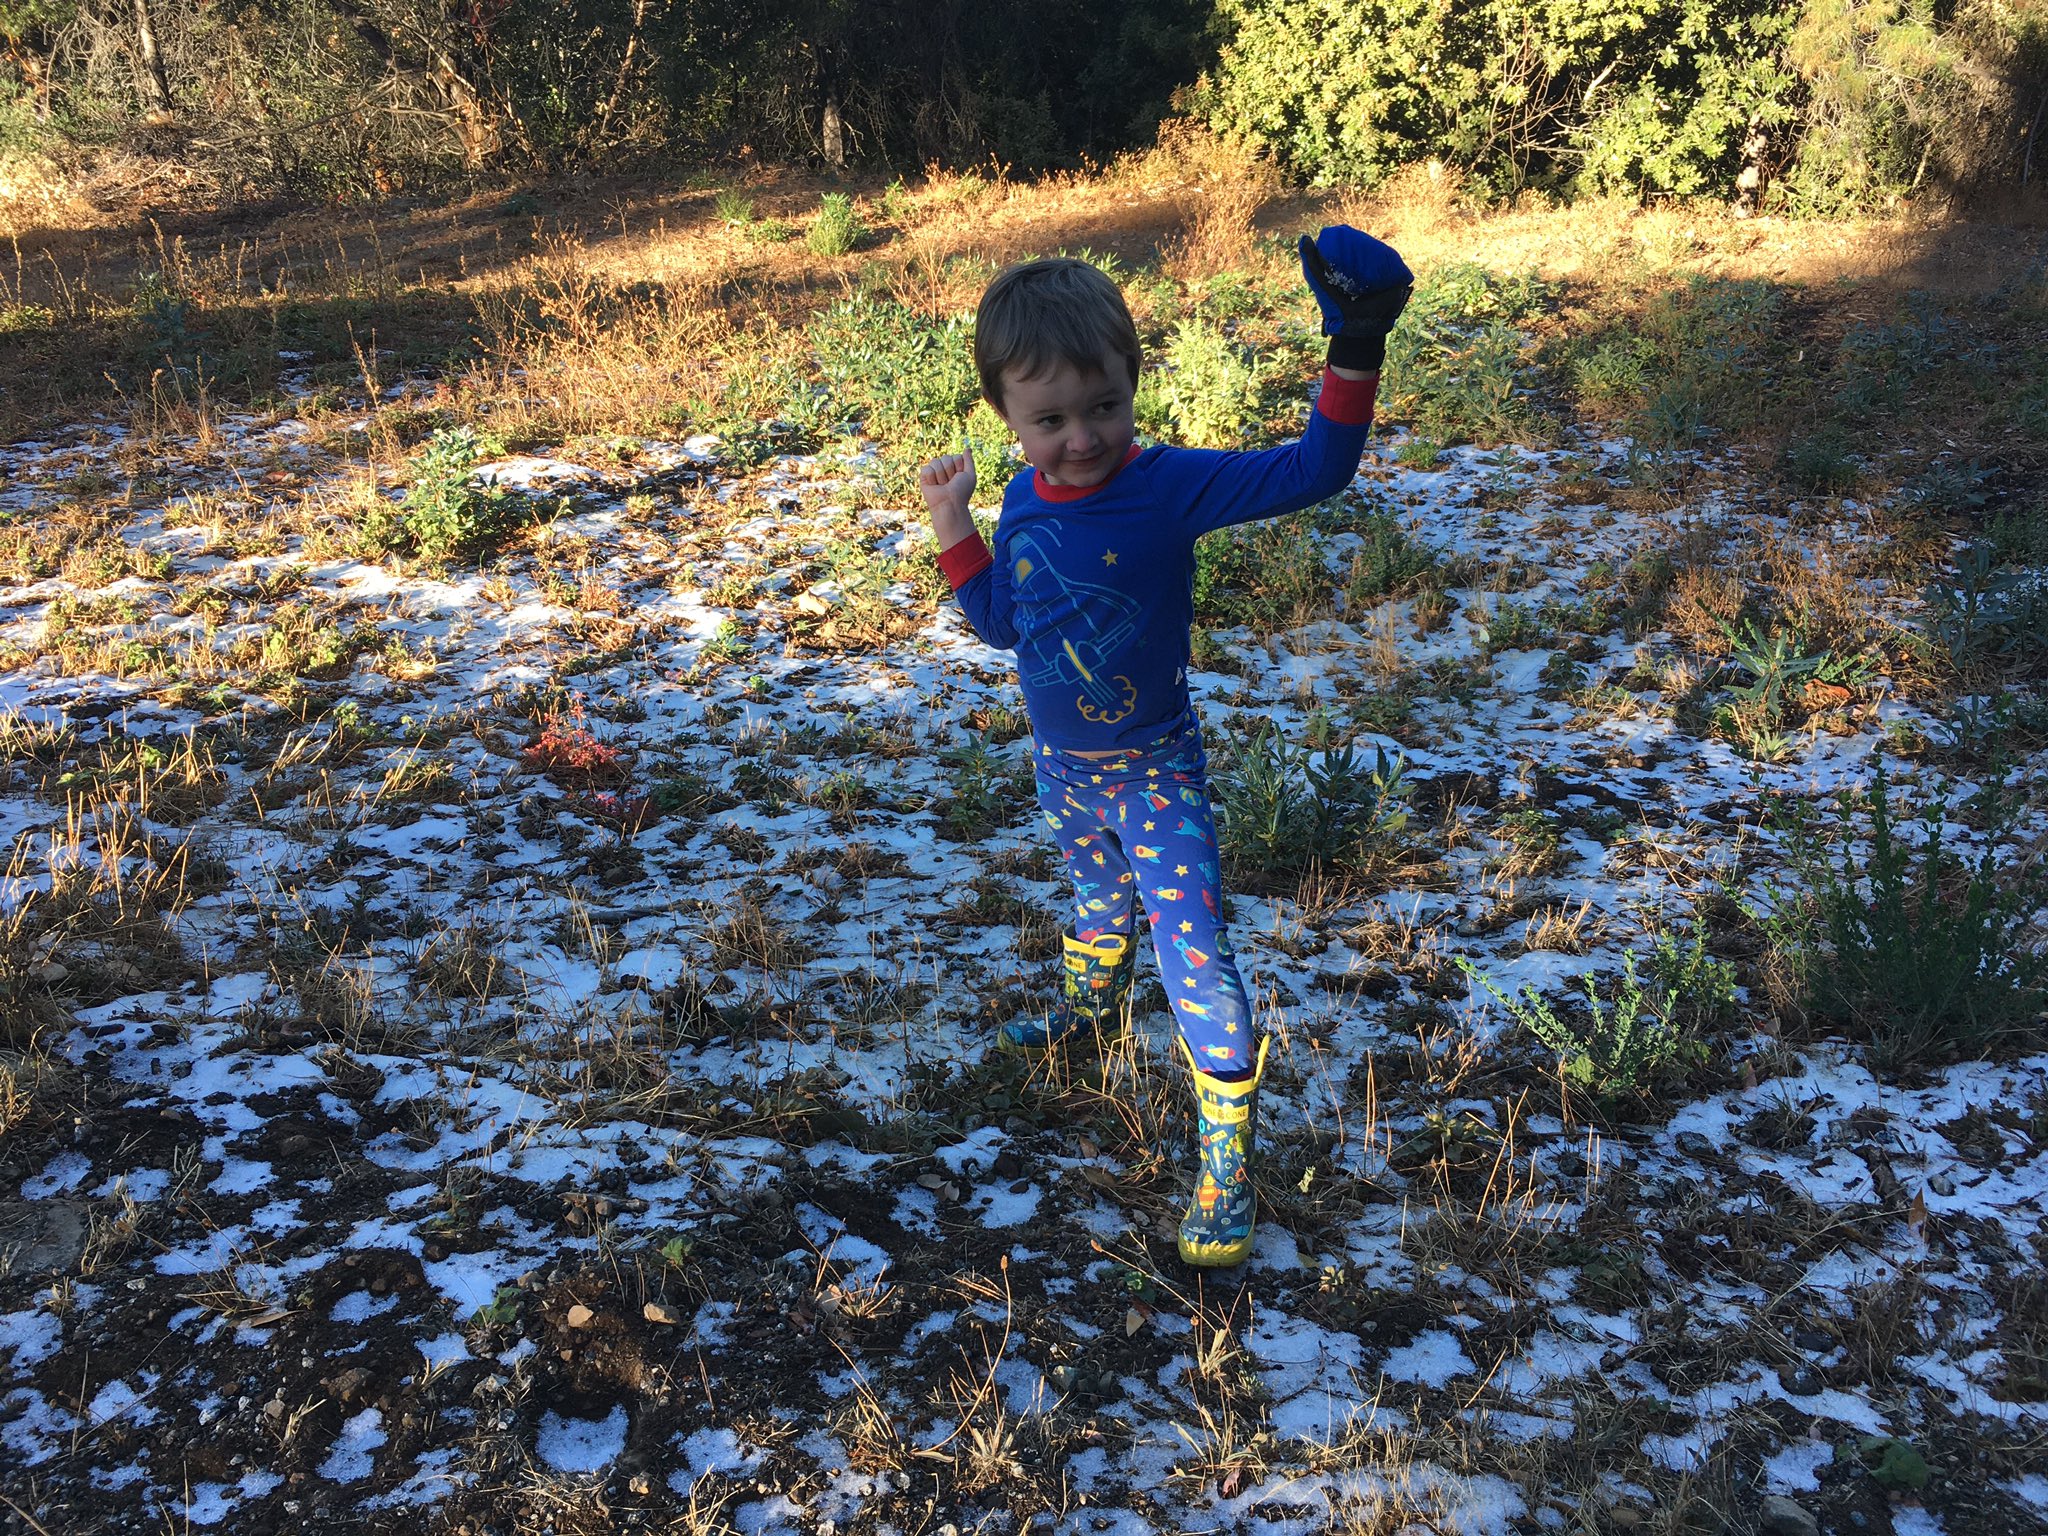 Julian, dressed in pajamas and rain boots, standing on ground lightly spotted with snow.